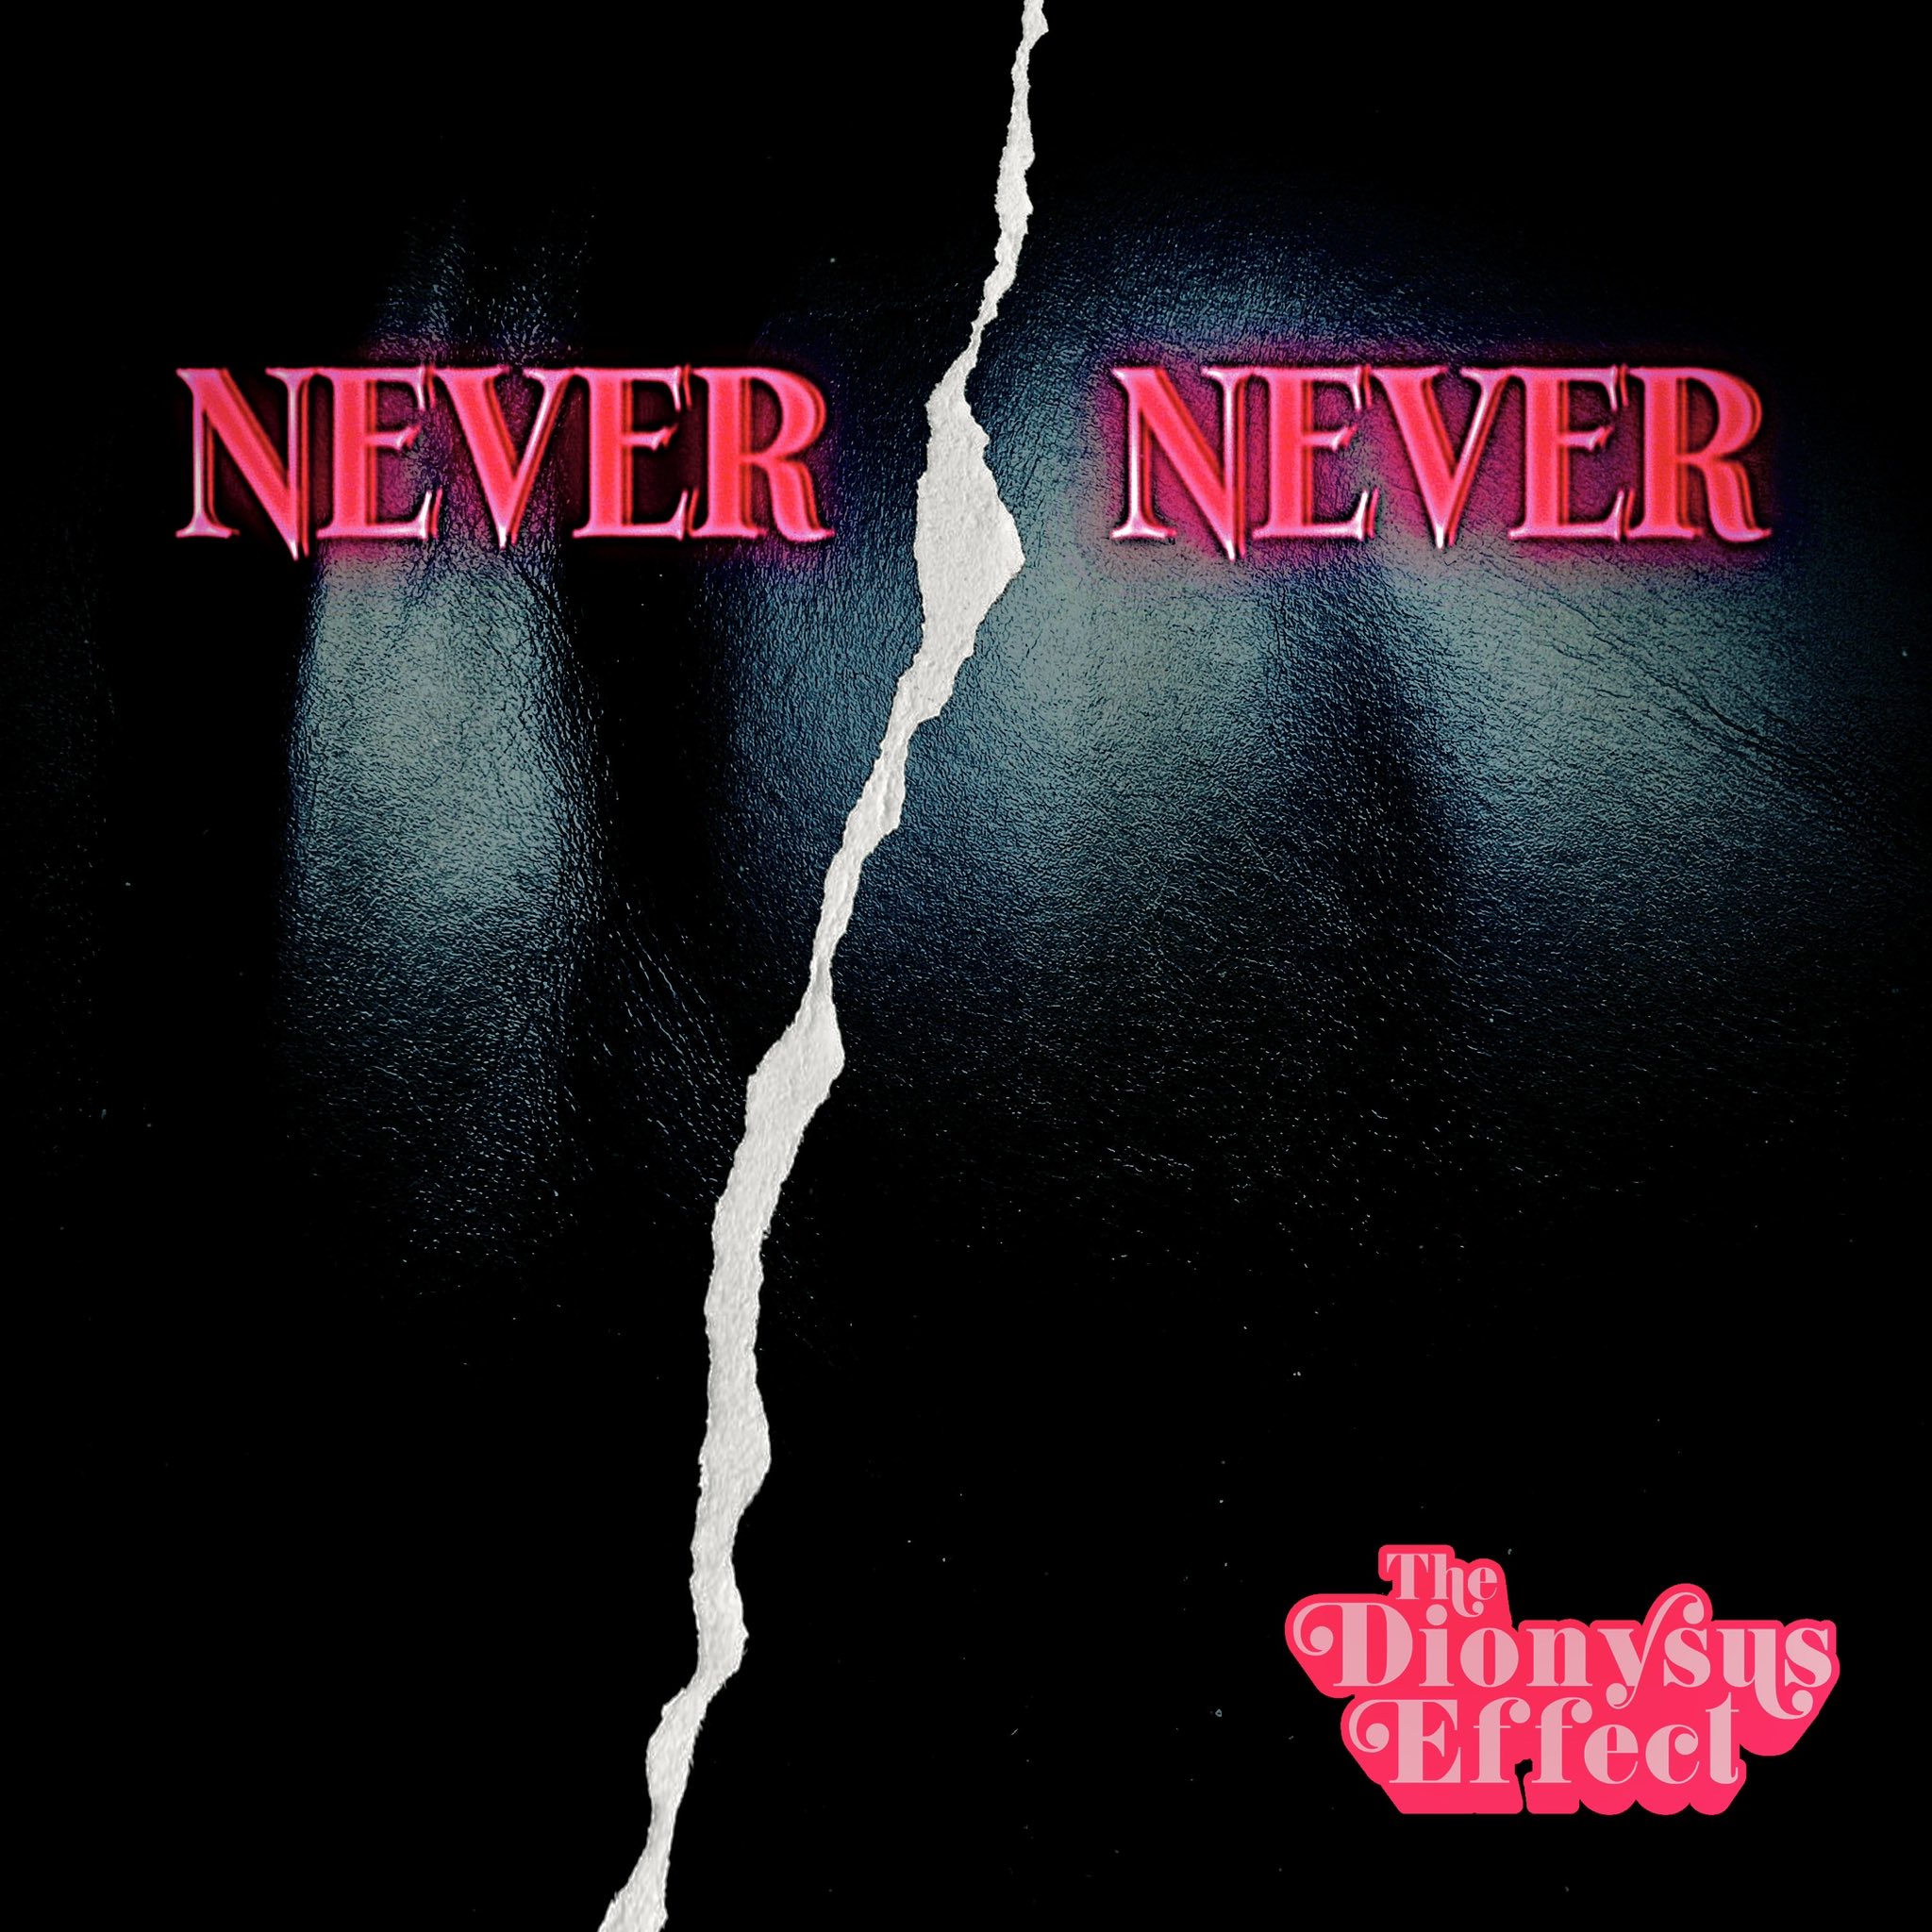 LISTEN: “Never Never” by The Dionysus Effect